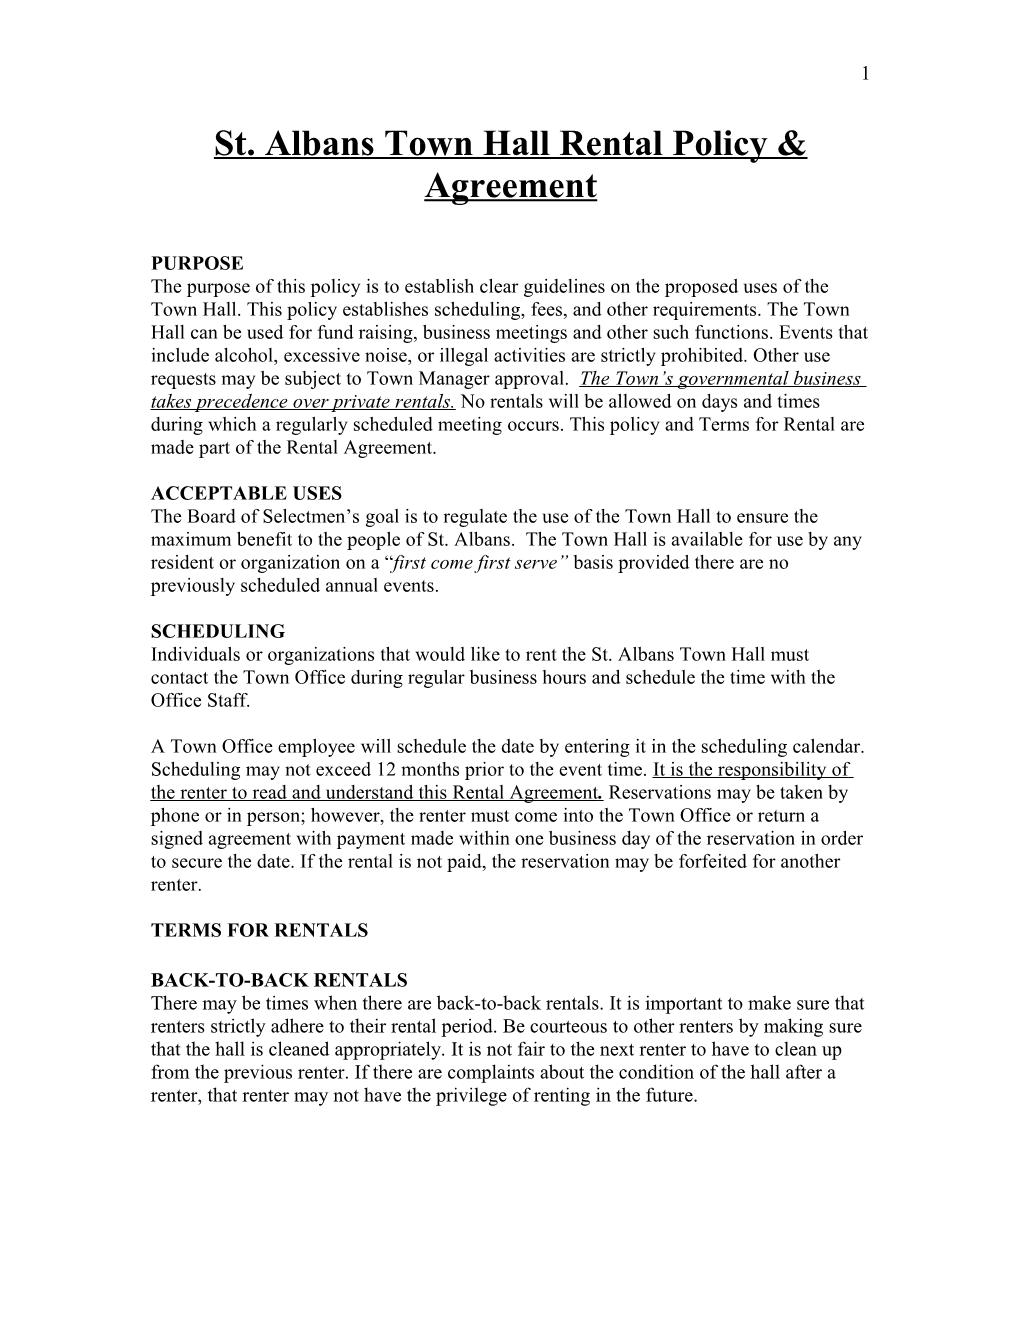 St. Albanstown Hall Rental Policy & Agreement